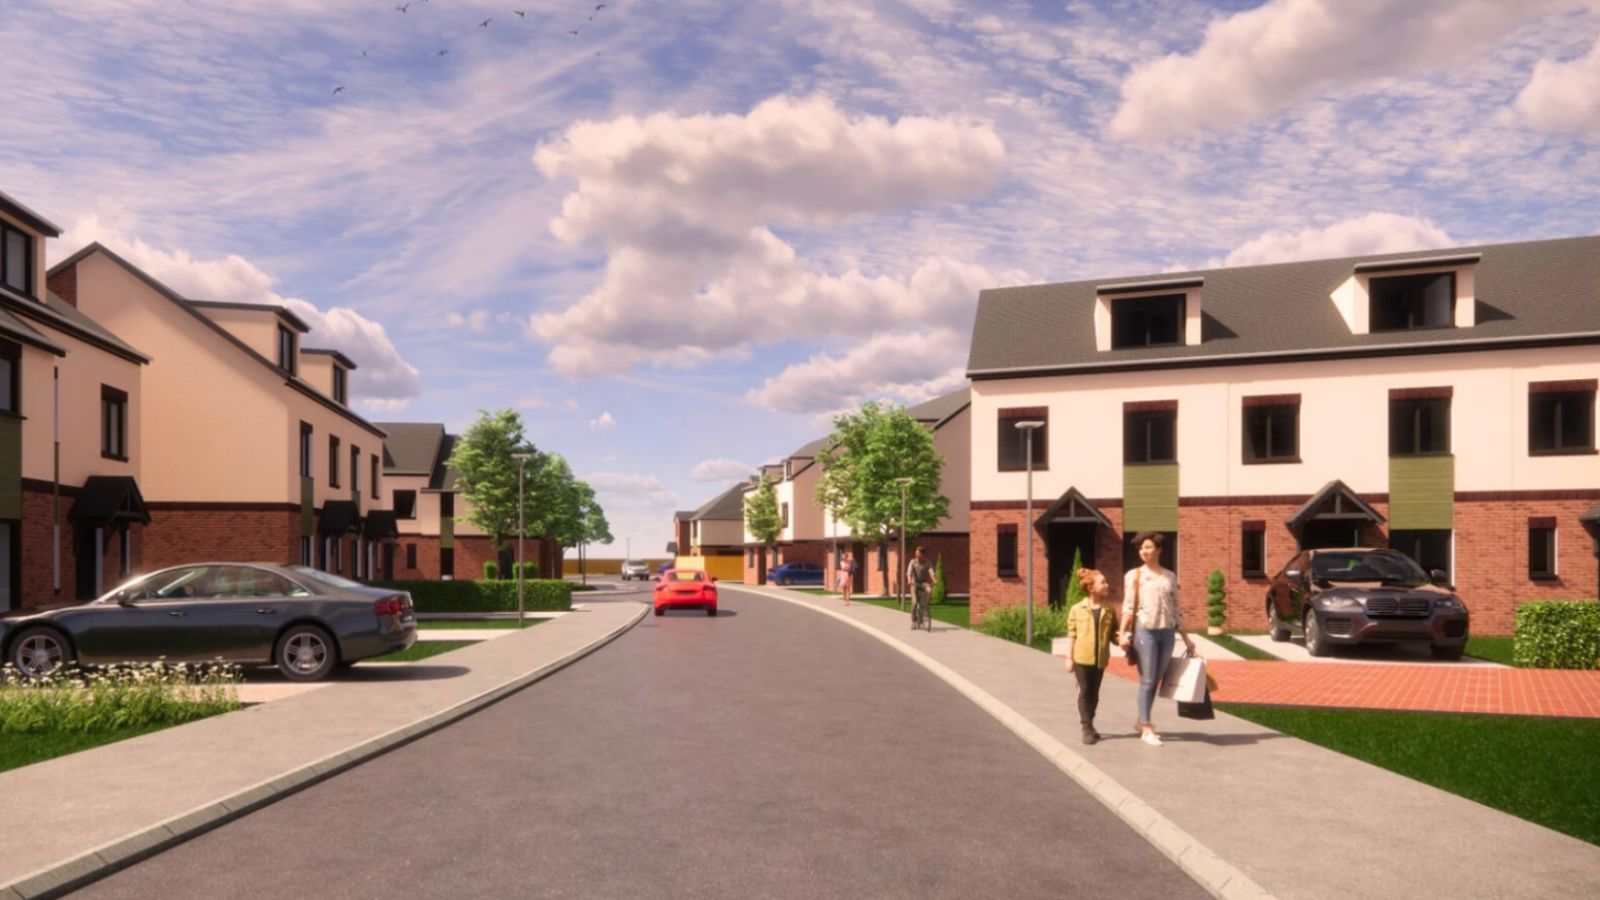 £25 million County Durham residential development to deliver over 100 new affordable homes